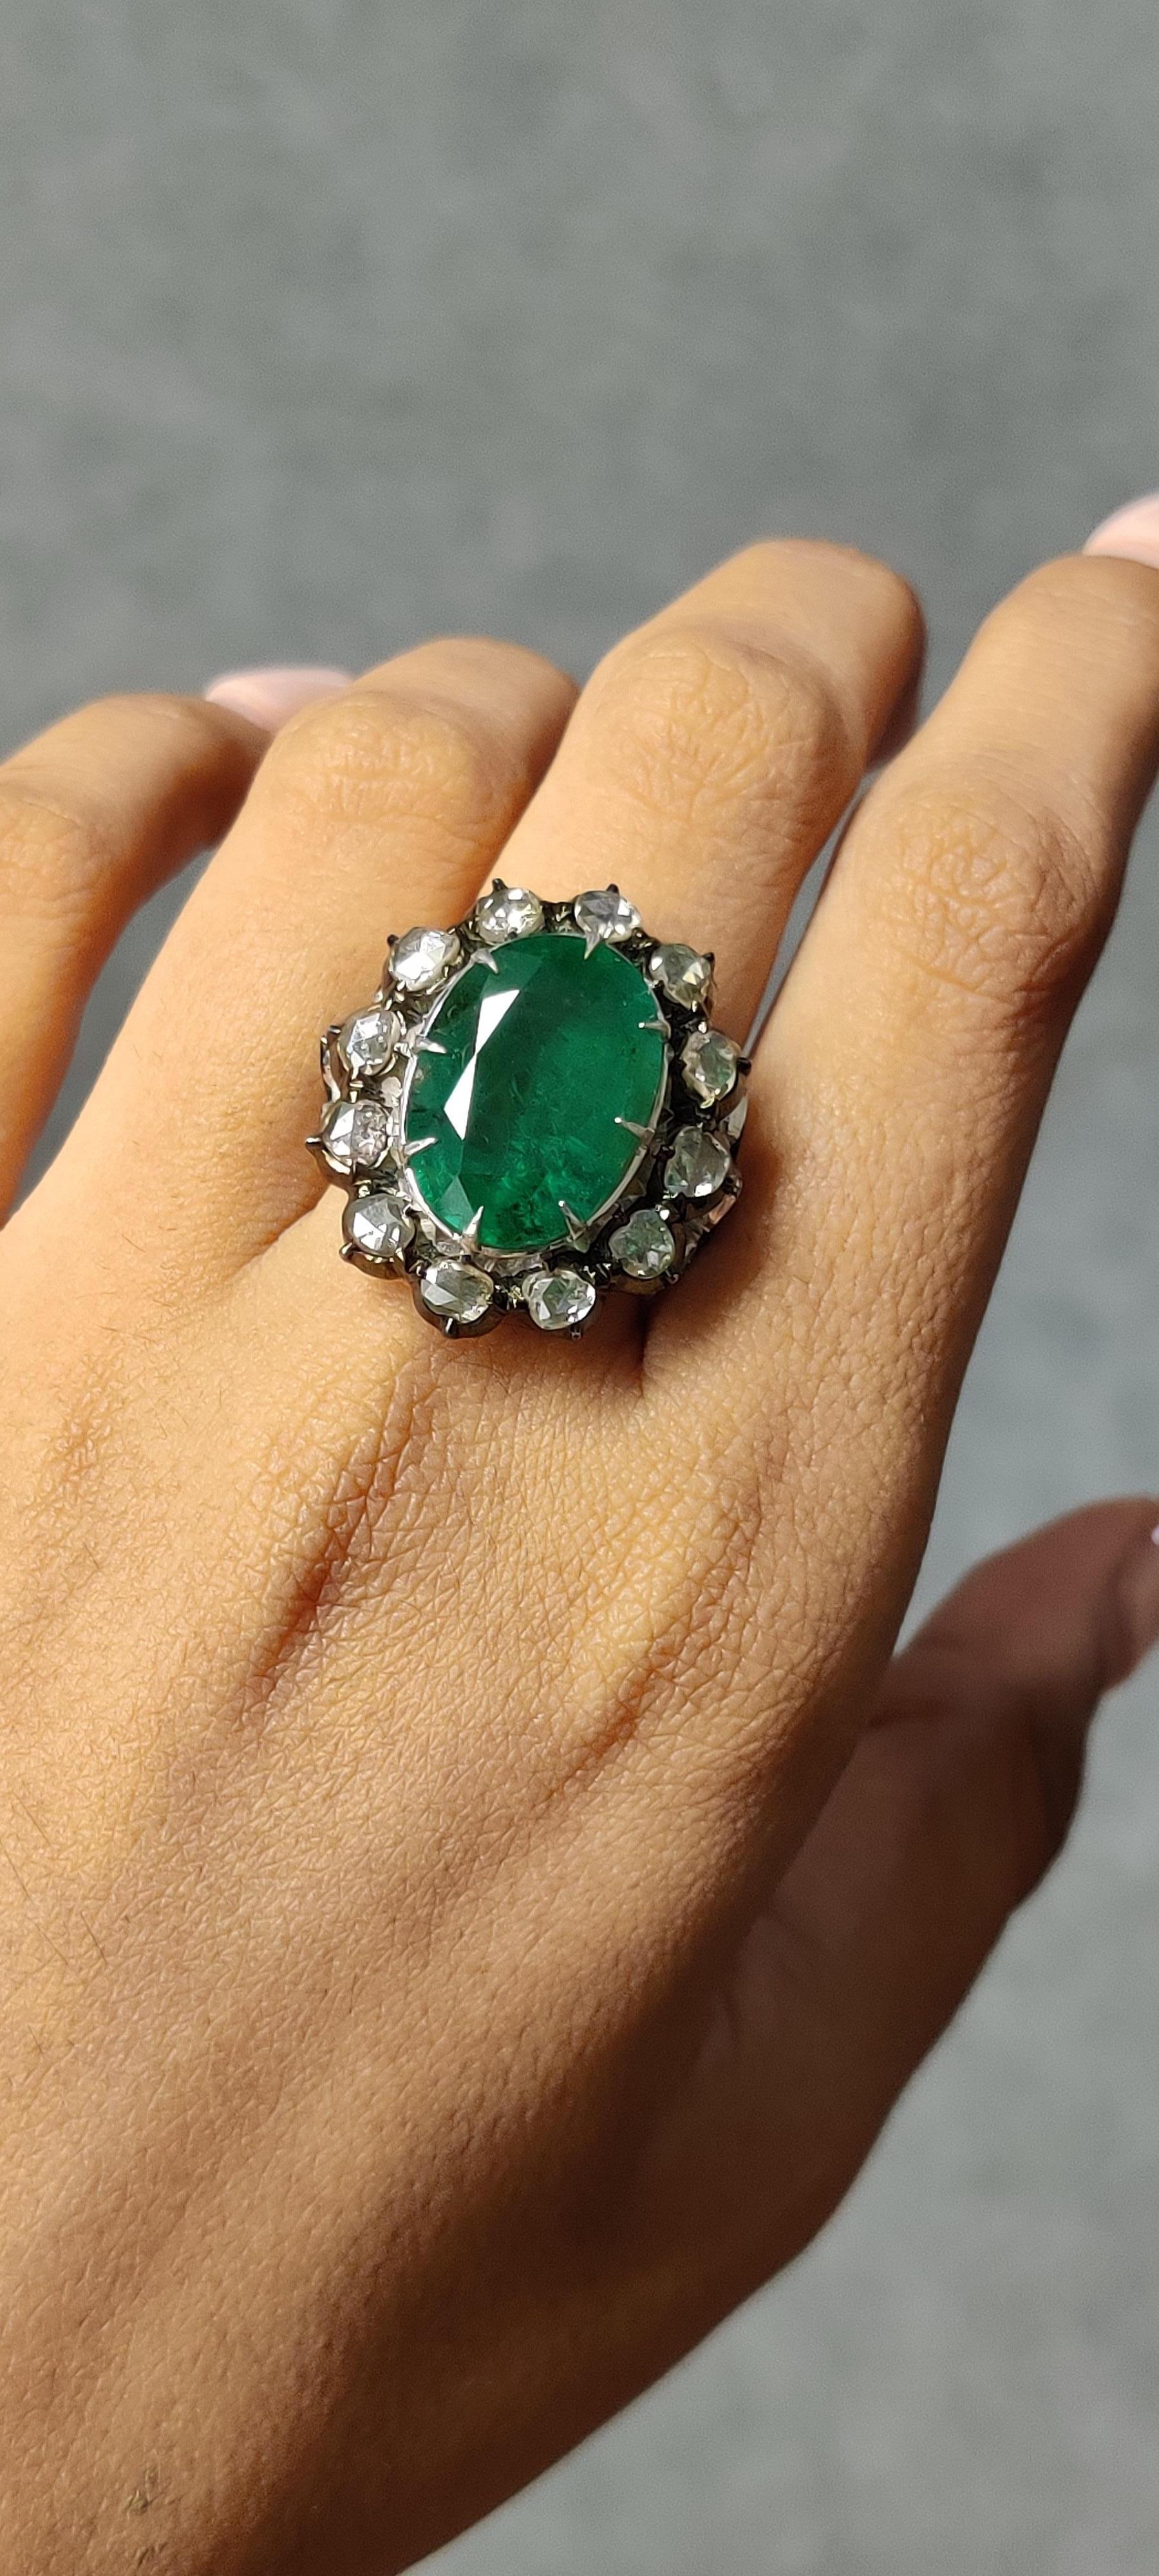  8.9 Ct Zambian Emerald Art Deco Ring with Rose Cut Diamonds in 14K White Gold For Sale 6